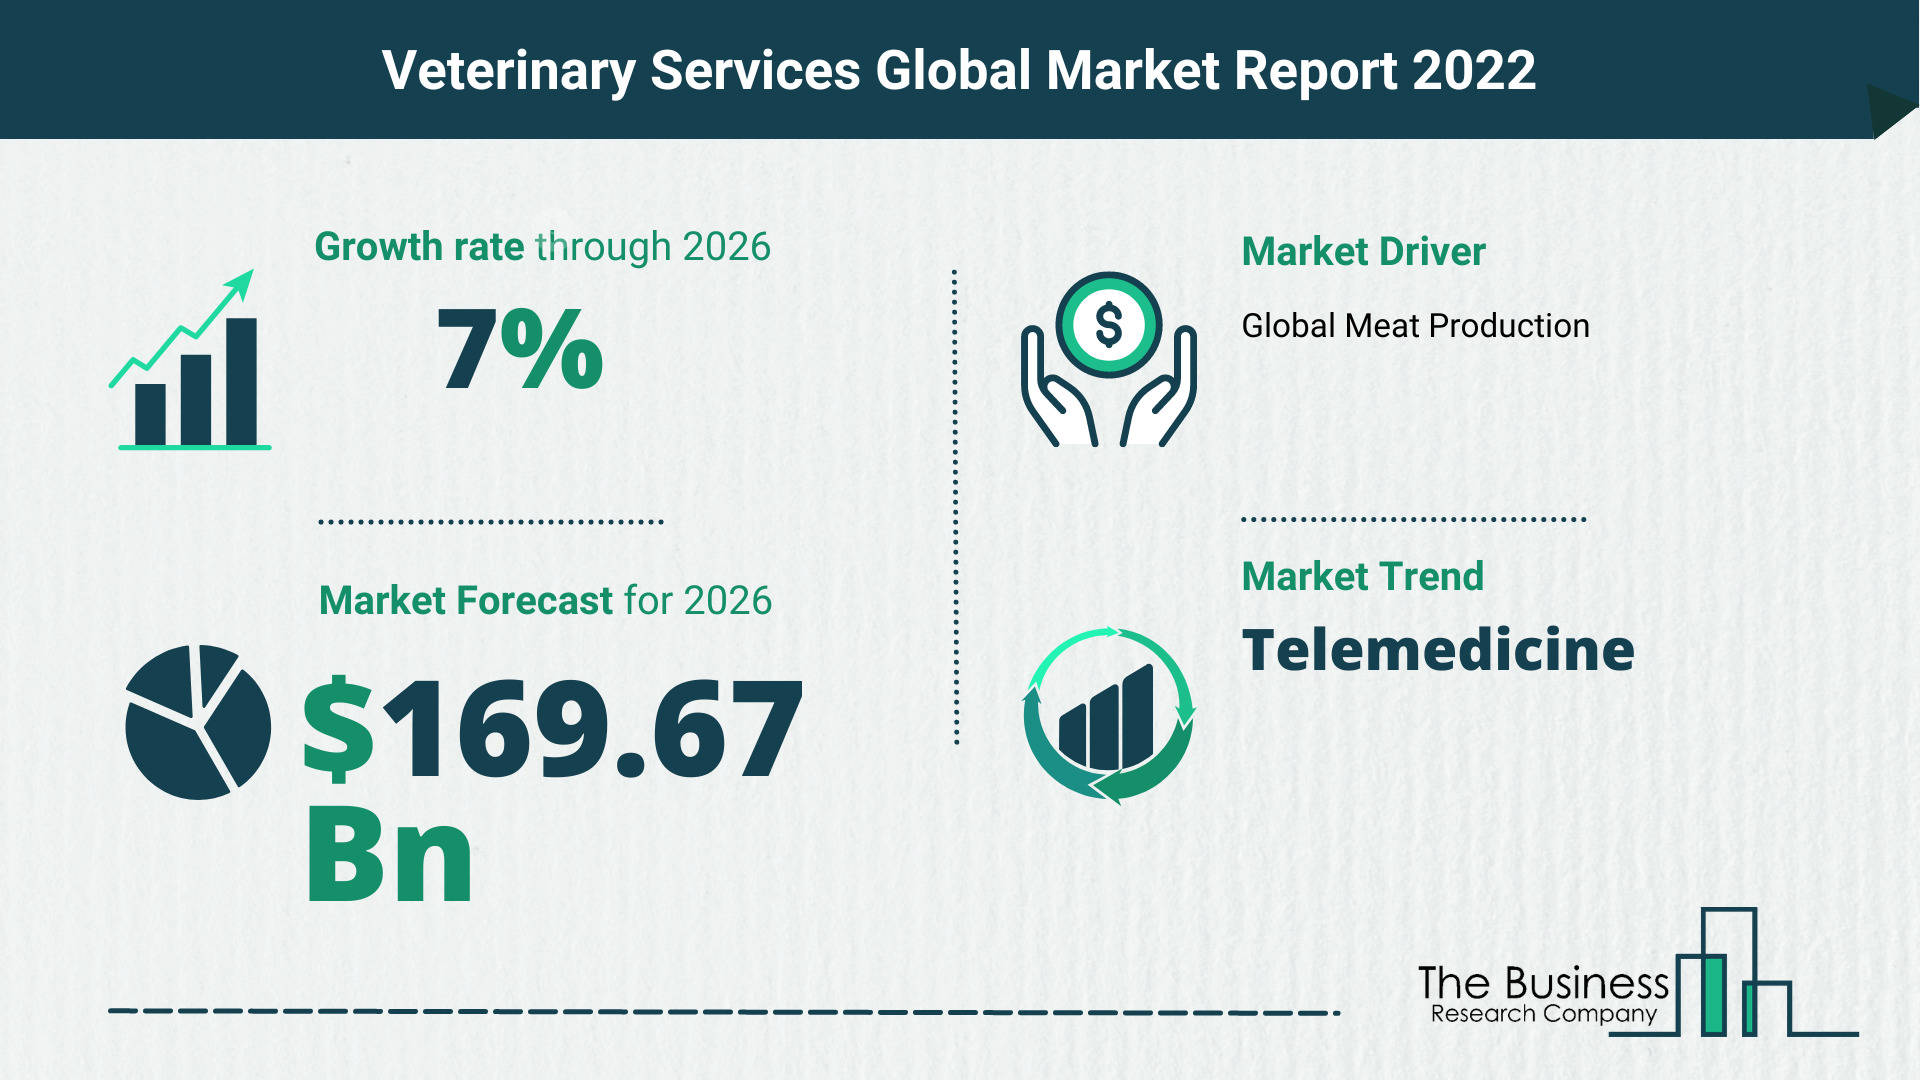 What Is The Veterinary Services Market Overview In 2022?